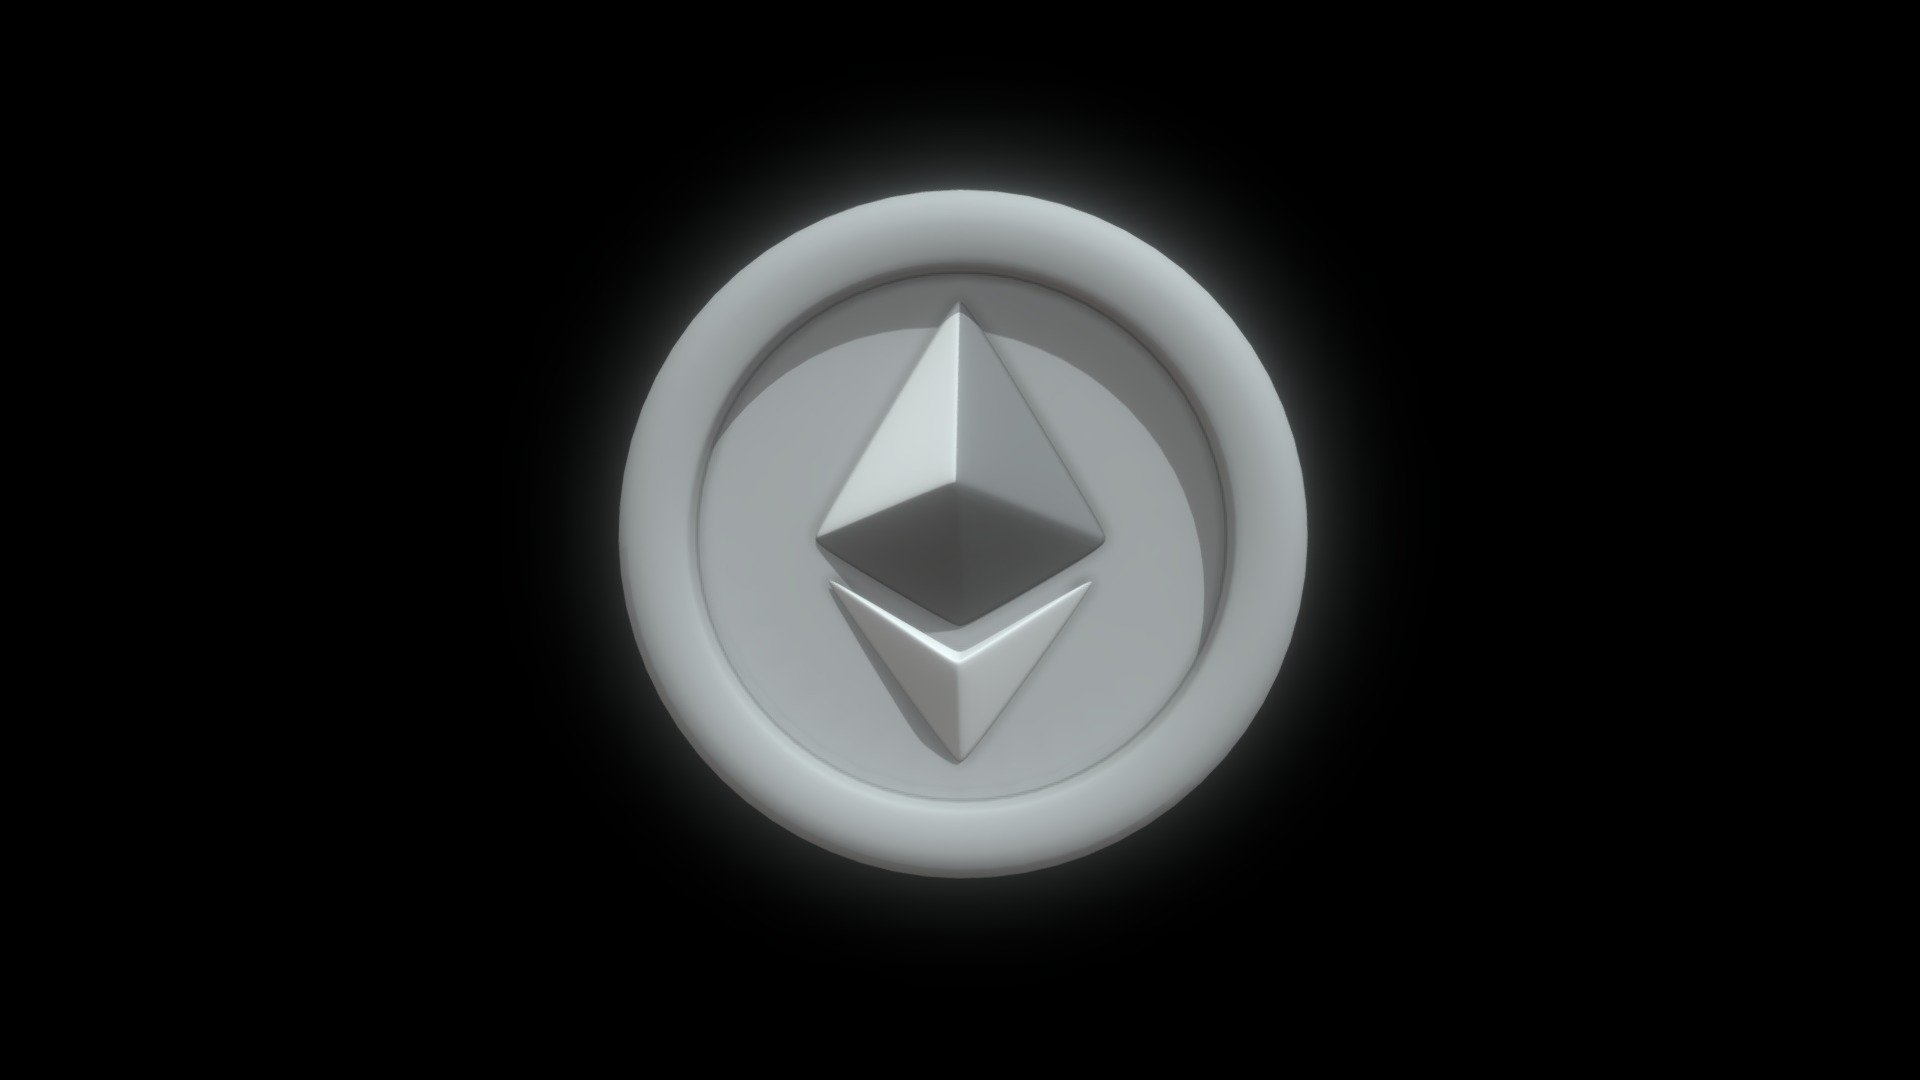 3D Ethereum Silver Coin model with cartoon style Made in Blender 3.1.2

This model does include a TEXTURE, DIFFUSE and ROUGHNESS MAP, but if you want to change the color you can change it in the blend file, just use the principled bsdf and play with the rough and base color parameter

in the blender file i just included the lighting setting for rendering just like the preview image

If you want to get this model, just check my Artstation Profile Page in Here
https://www.artstation.com/cangbacang/profile - Ethereum Silver Coin with Cartoon Style - 3D model by cangbacang 3d model